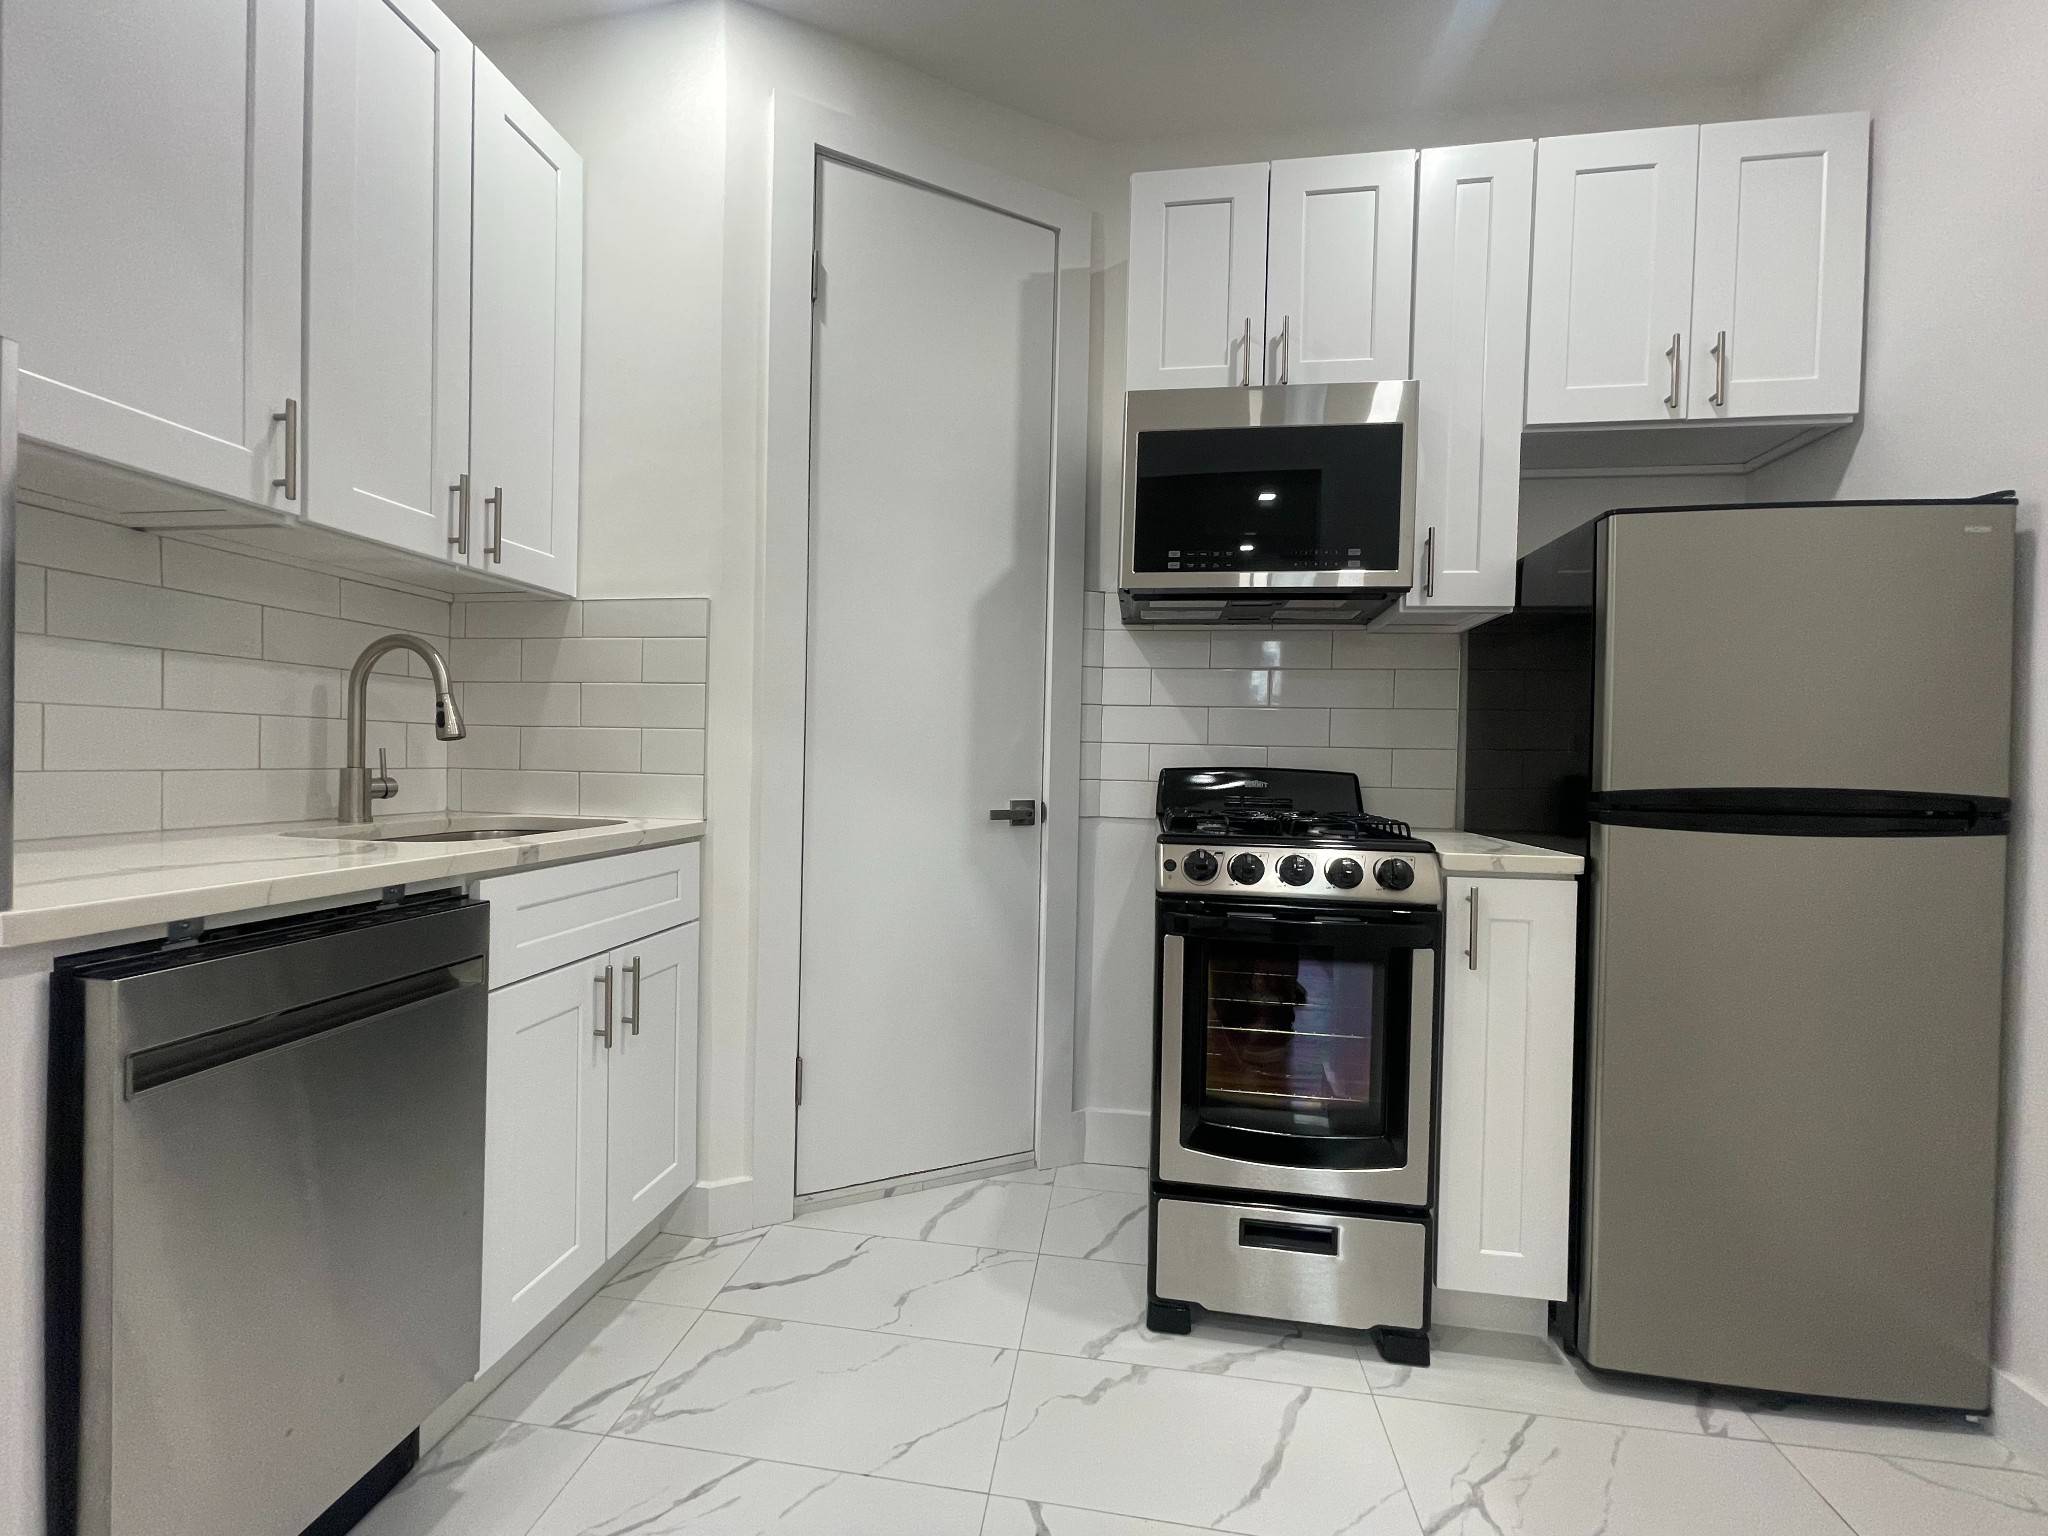 INQUIRE FOR A VIDEOAVAILABLE STARTING MAY 3RDCome and see this NEWLY RENOVATED 1 bedroom.